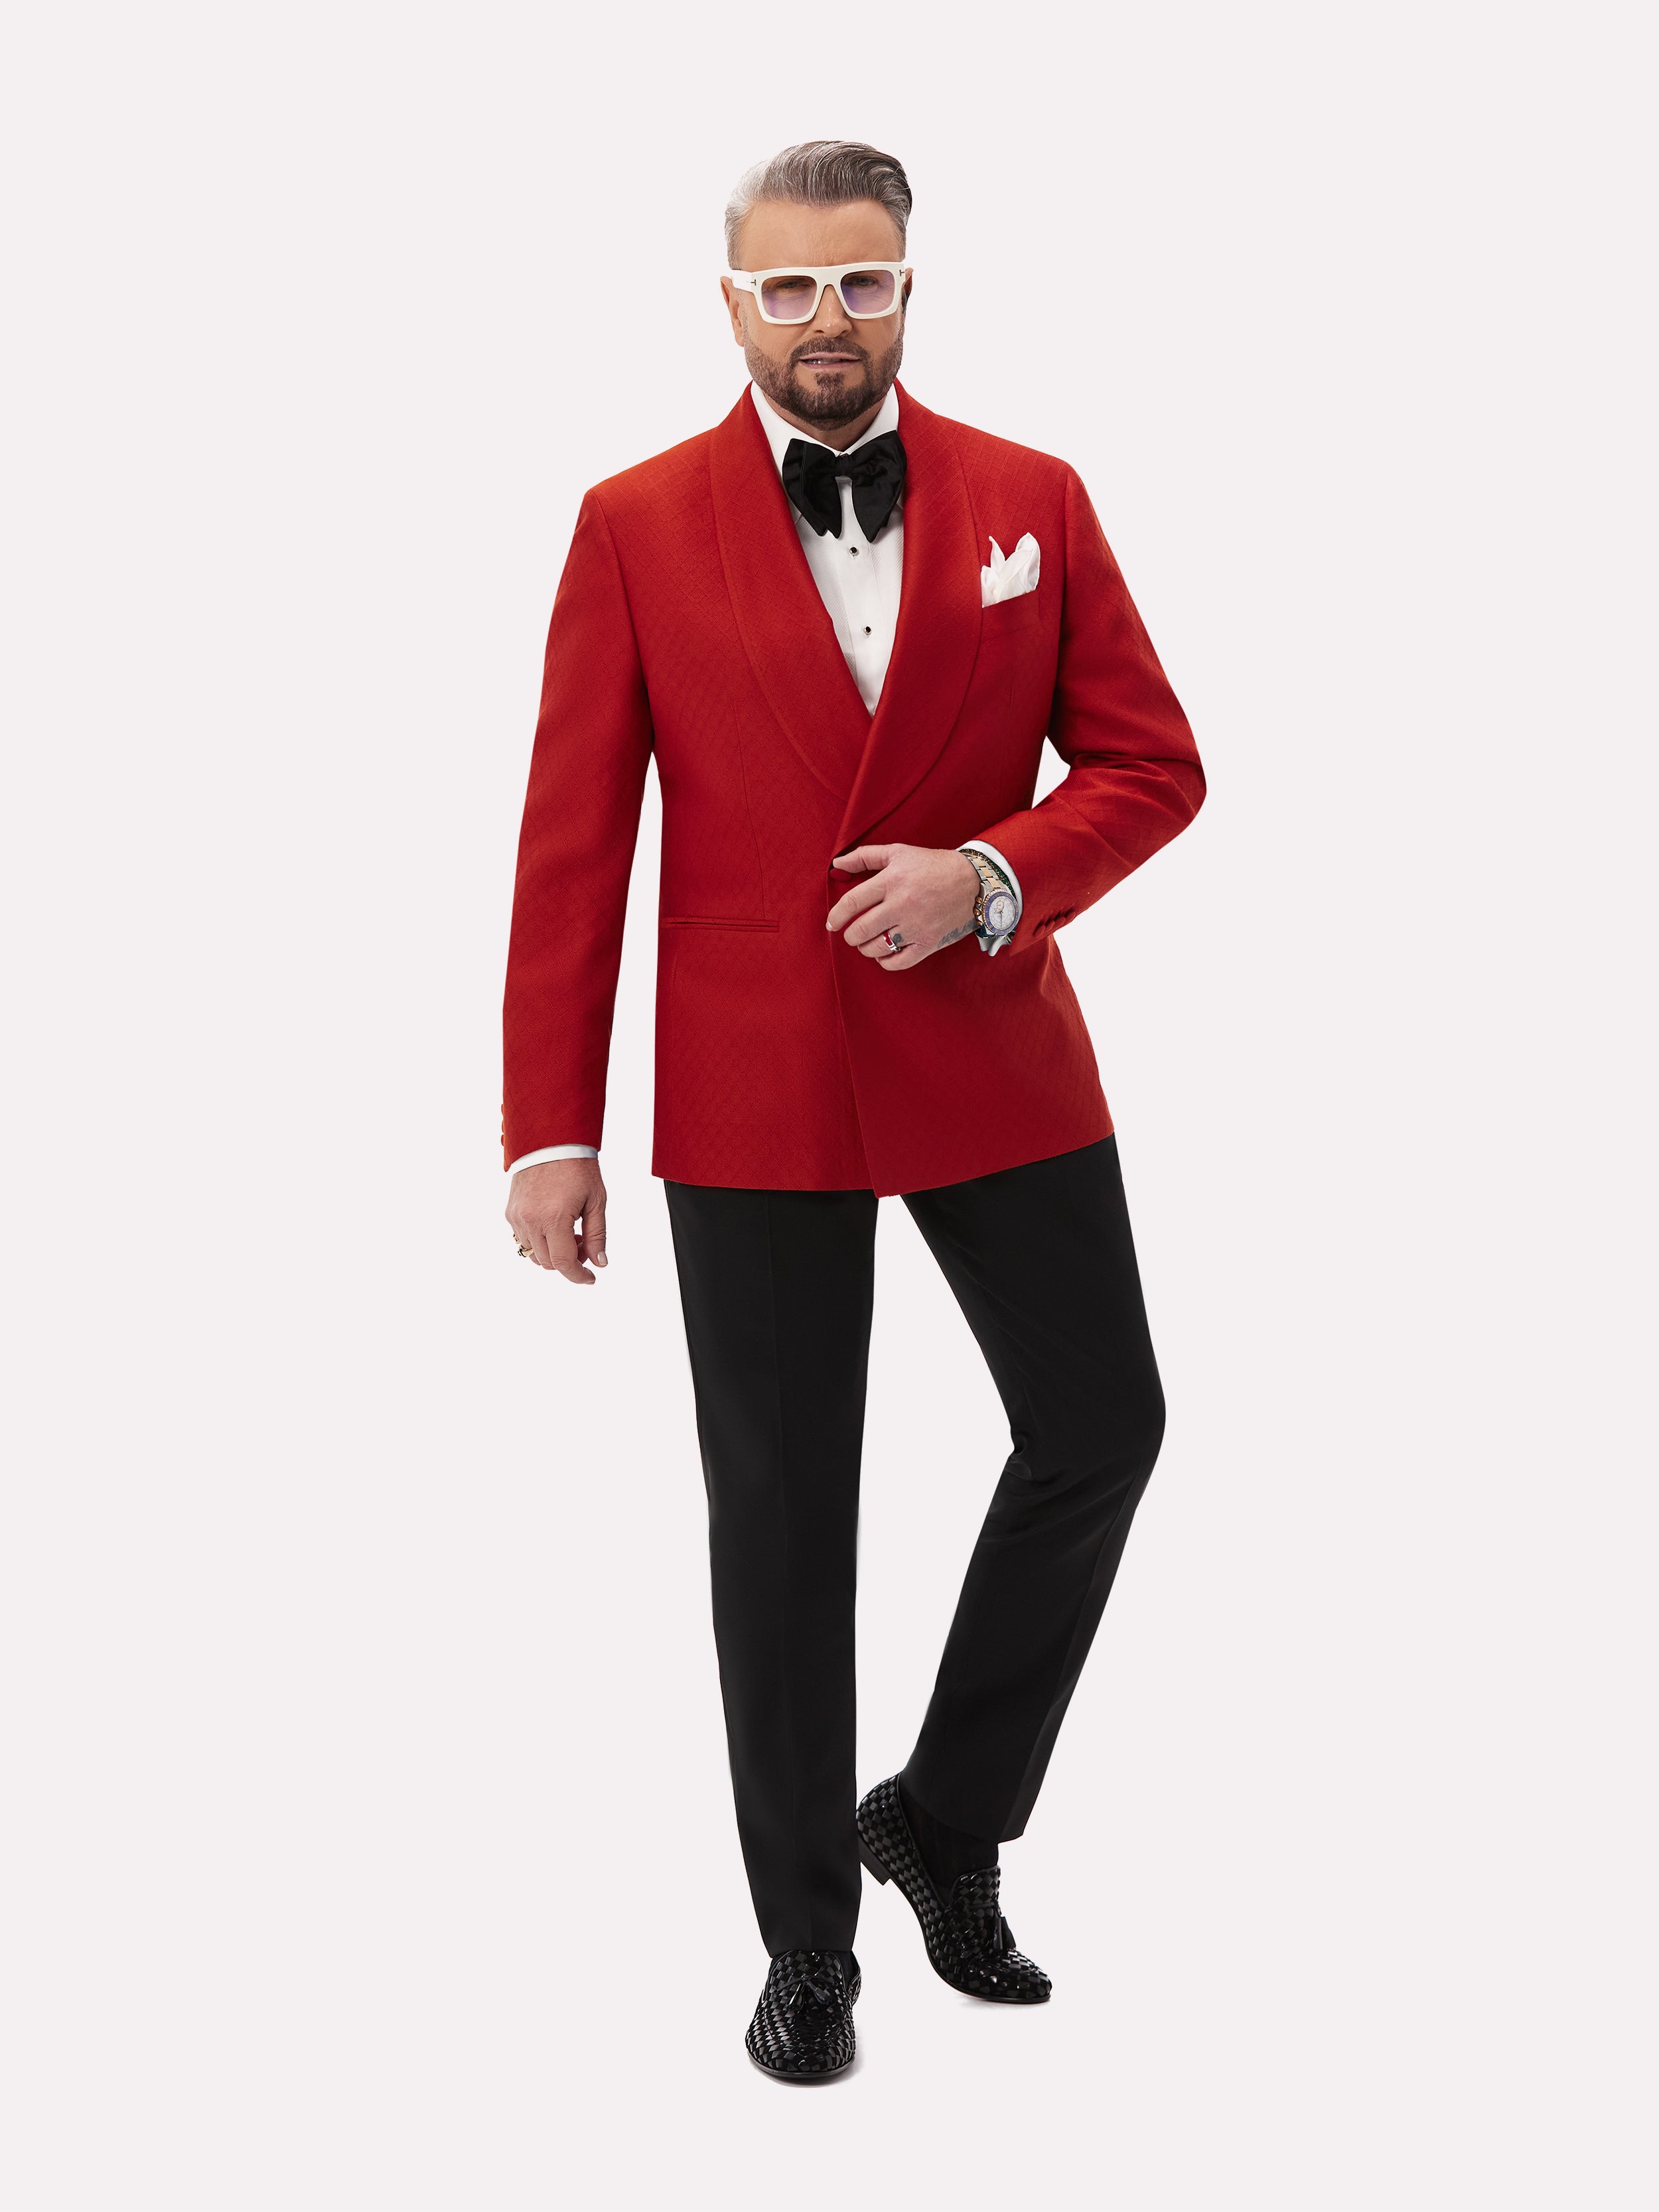 Red tuxedo jacket with two rows of buttons